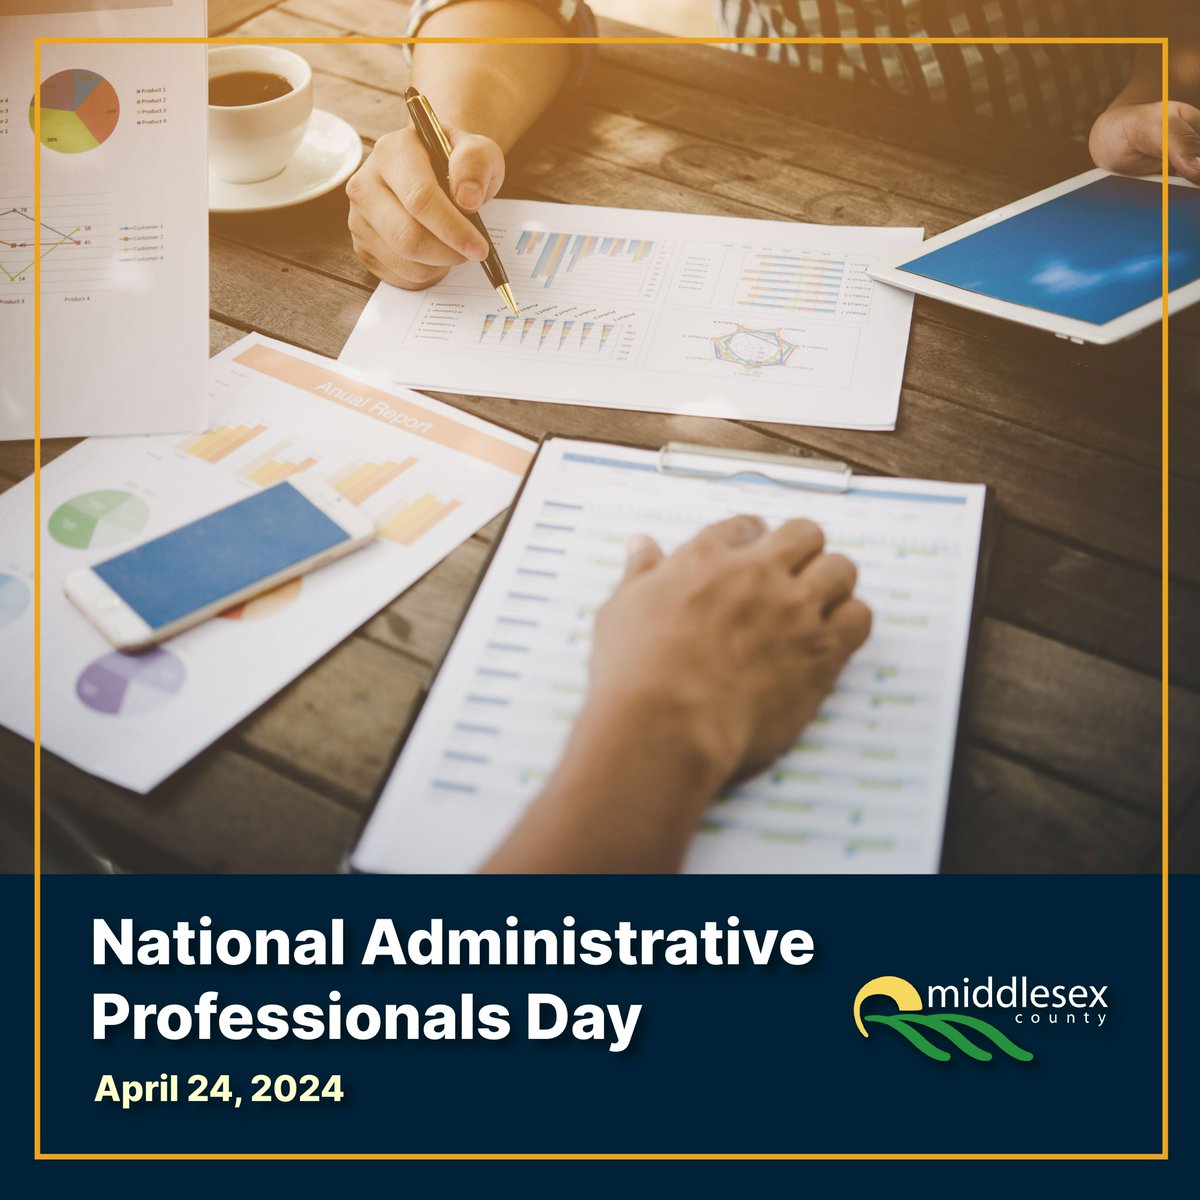 🎉 Happy National Administrative Professionals Day! 🌟 Middlesex County extends a heartfelt thank you to all the administrative professionals for their dedication, efficiency, and positive attitude at the workplace. Today, we celebrate YOU and all that you do to support our team